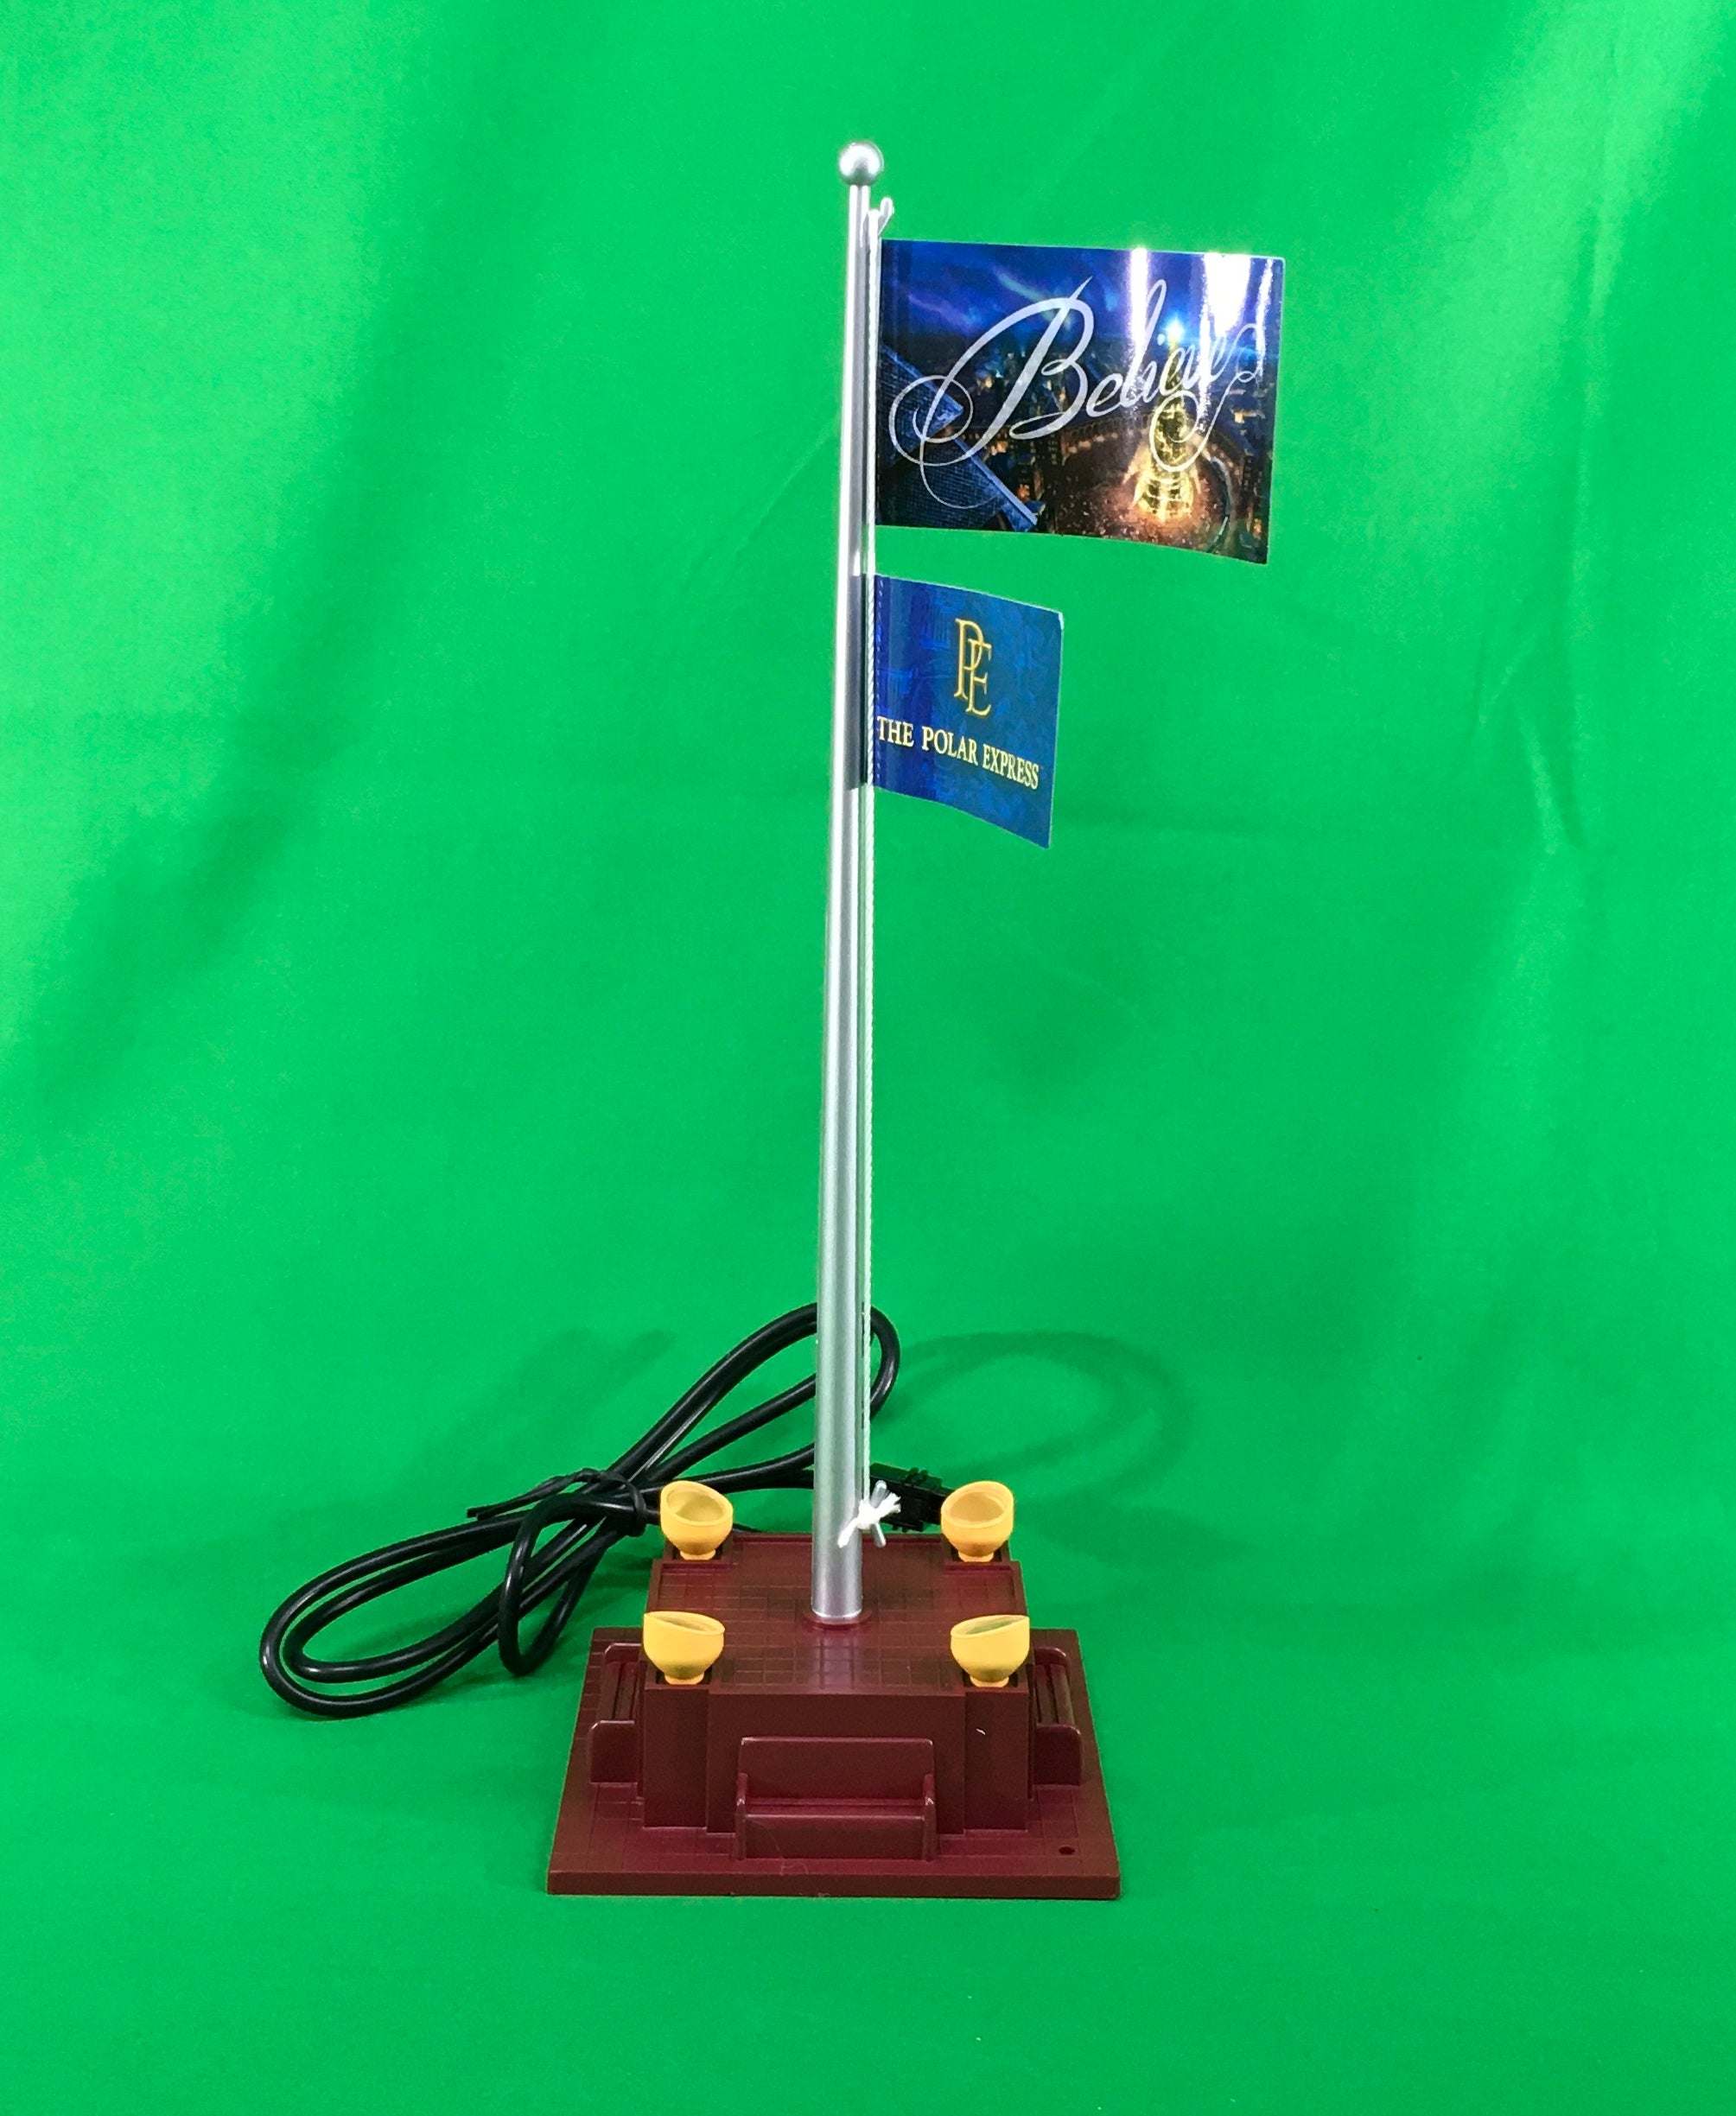 Lionel 6-85271 - Plug-Expand-Play Flagpole "The Polar Express"